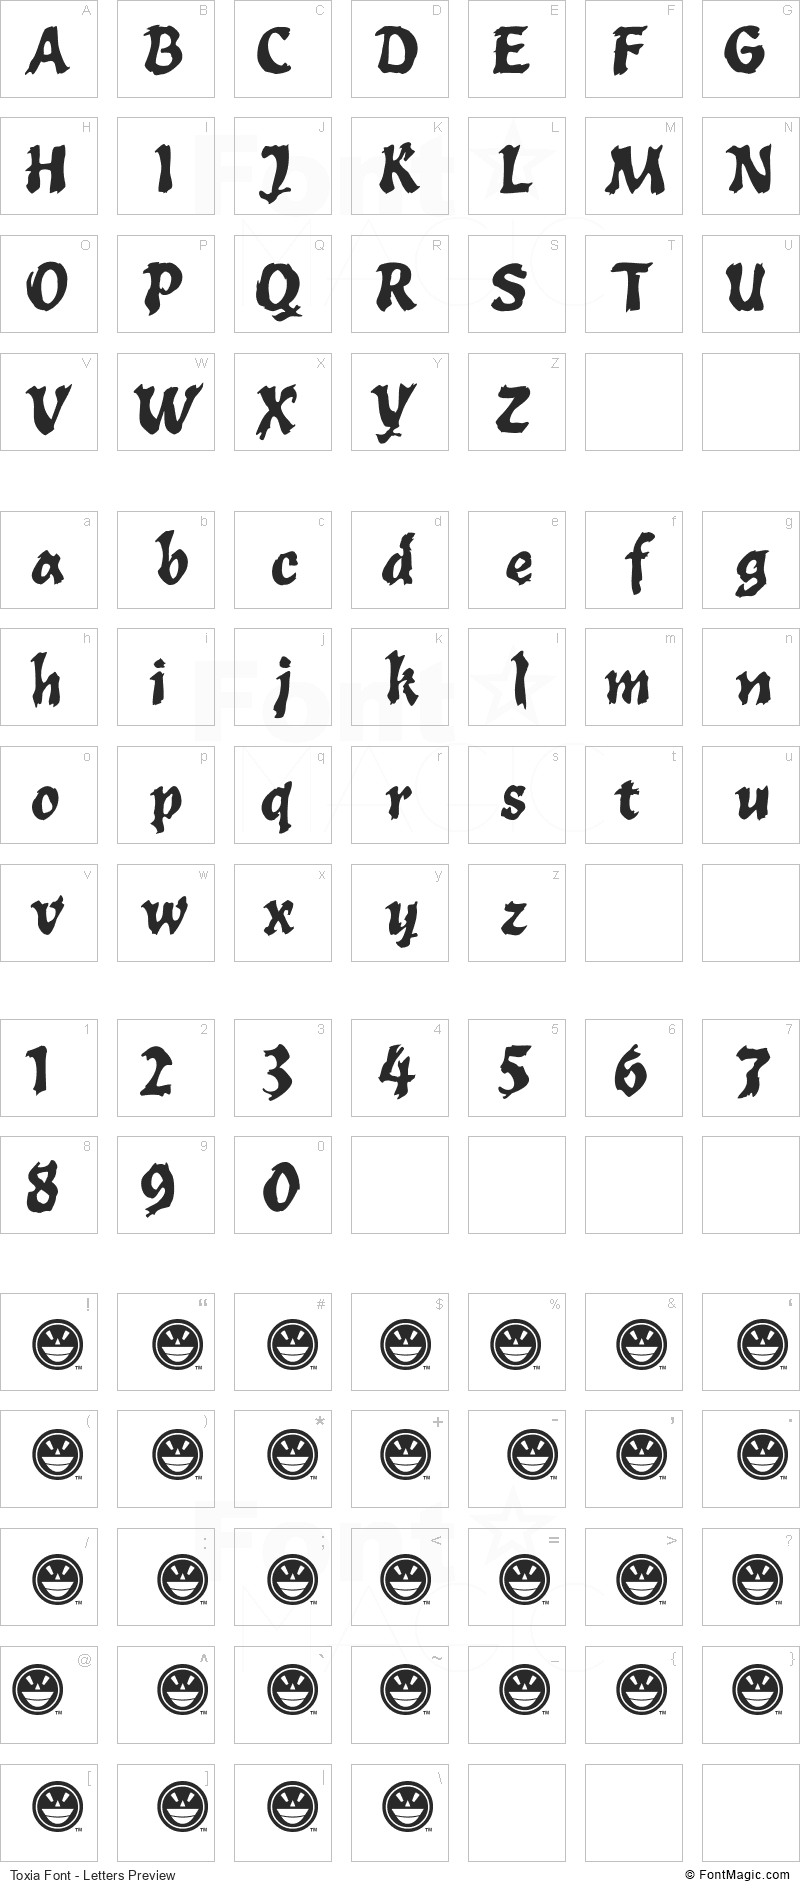 Toxia Font - All Latters Preview Chart